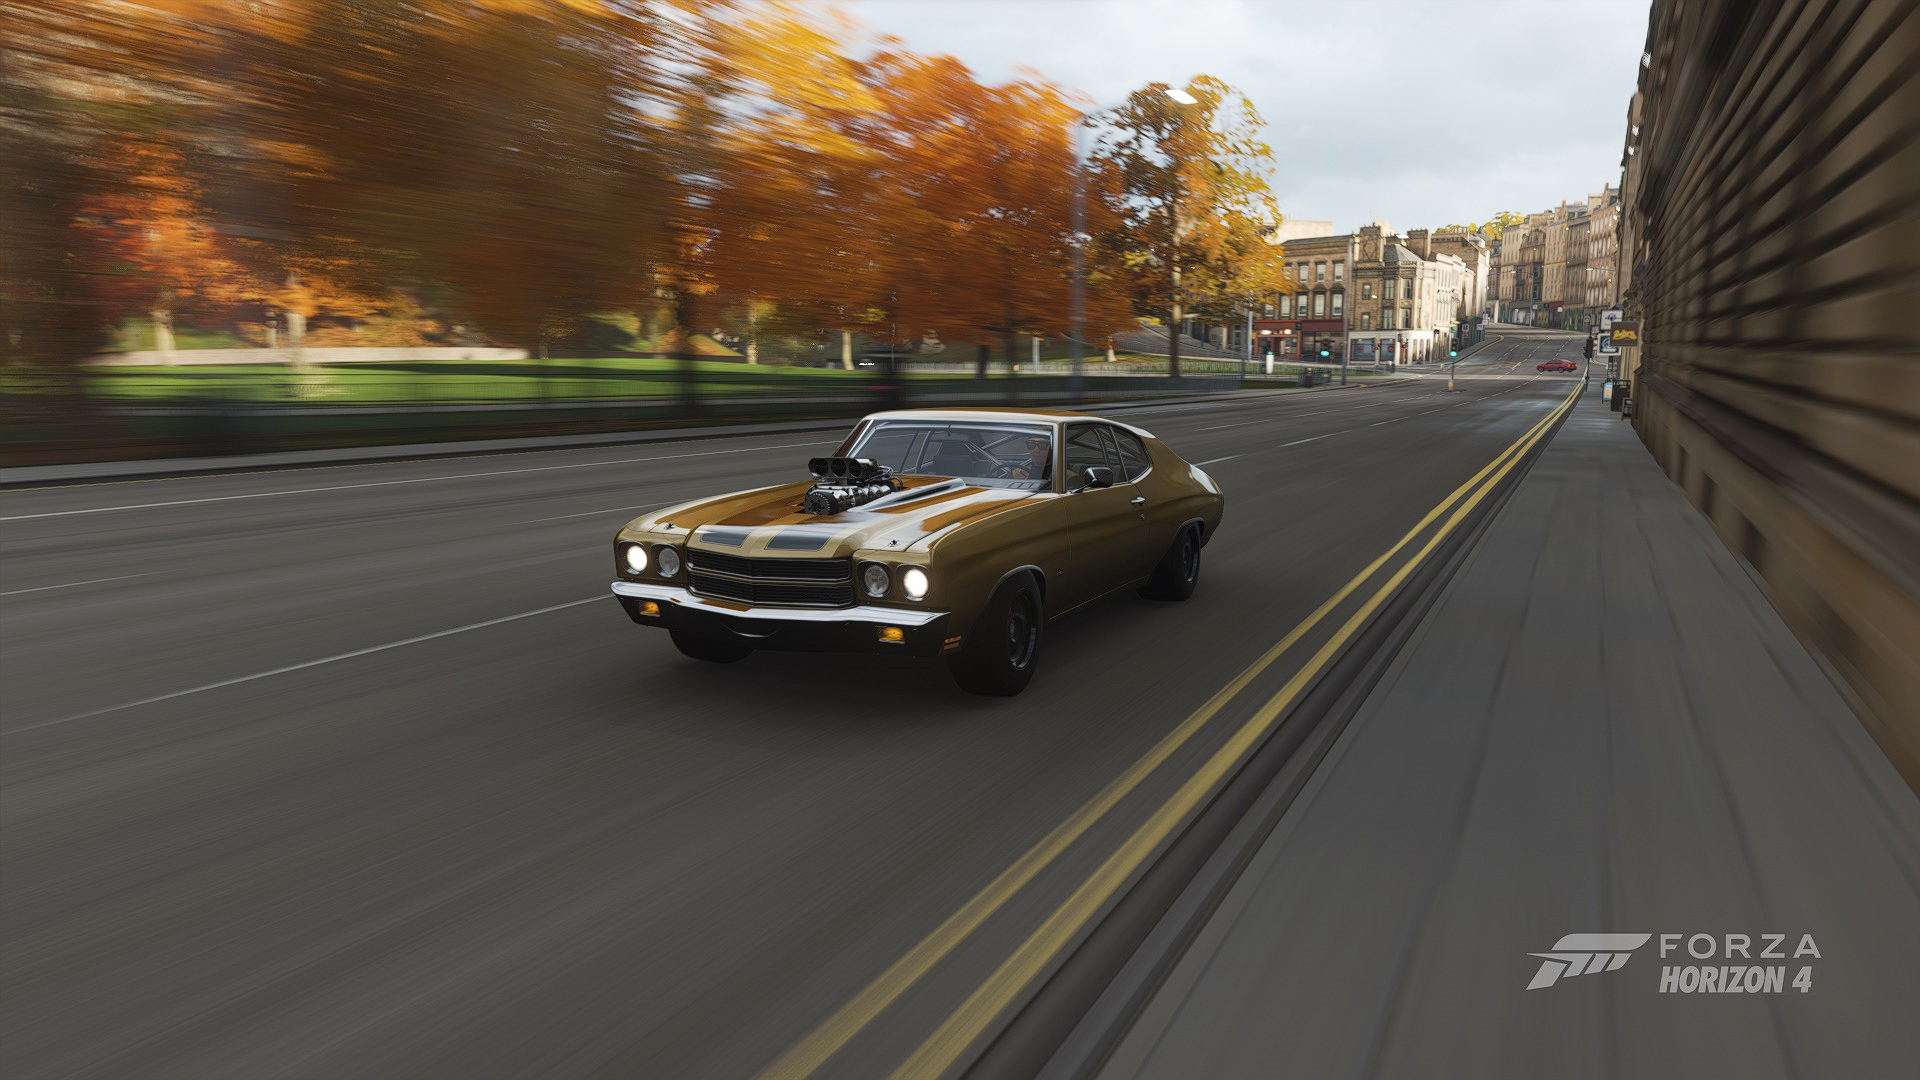 General 1920x1080 Forza Horizon 4 Forza Horizon Forza car CGI driving 1970 chevrolet chevelle super sport Chevelle SS road video games logo headlights trees frontal view blurred blurry background